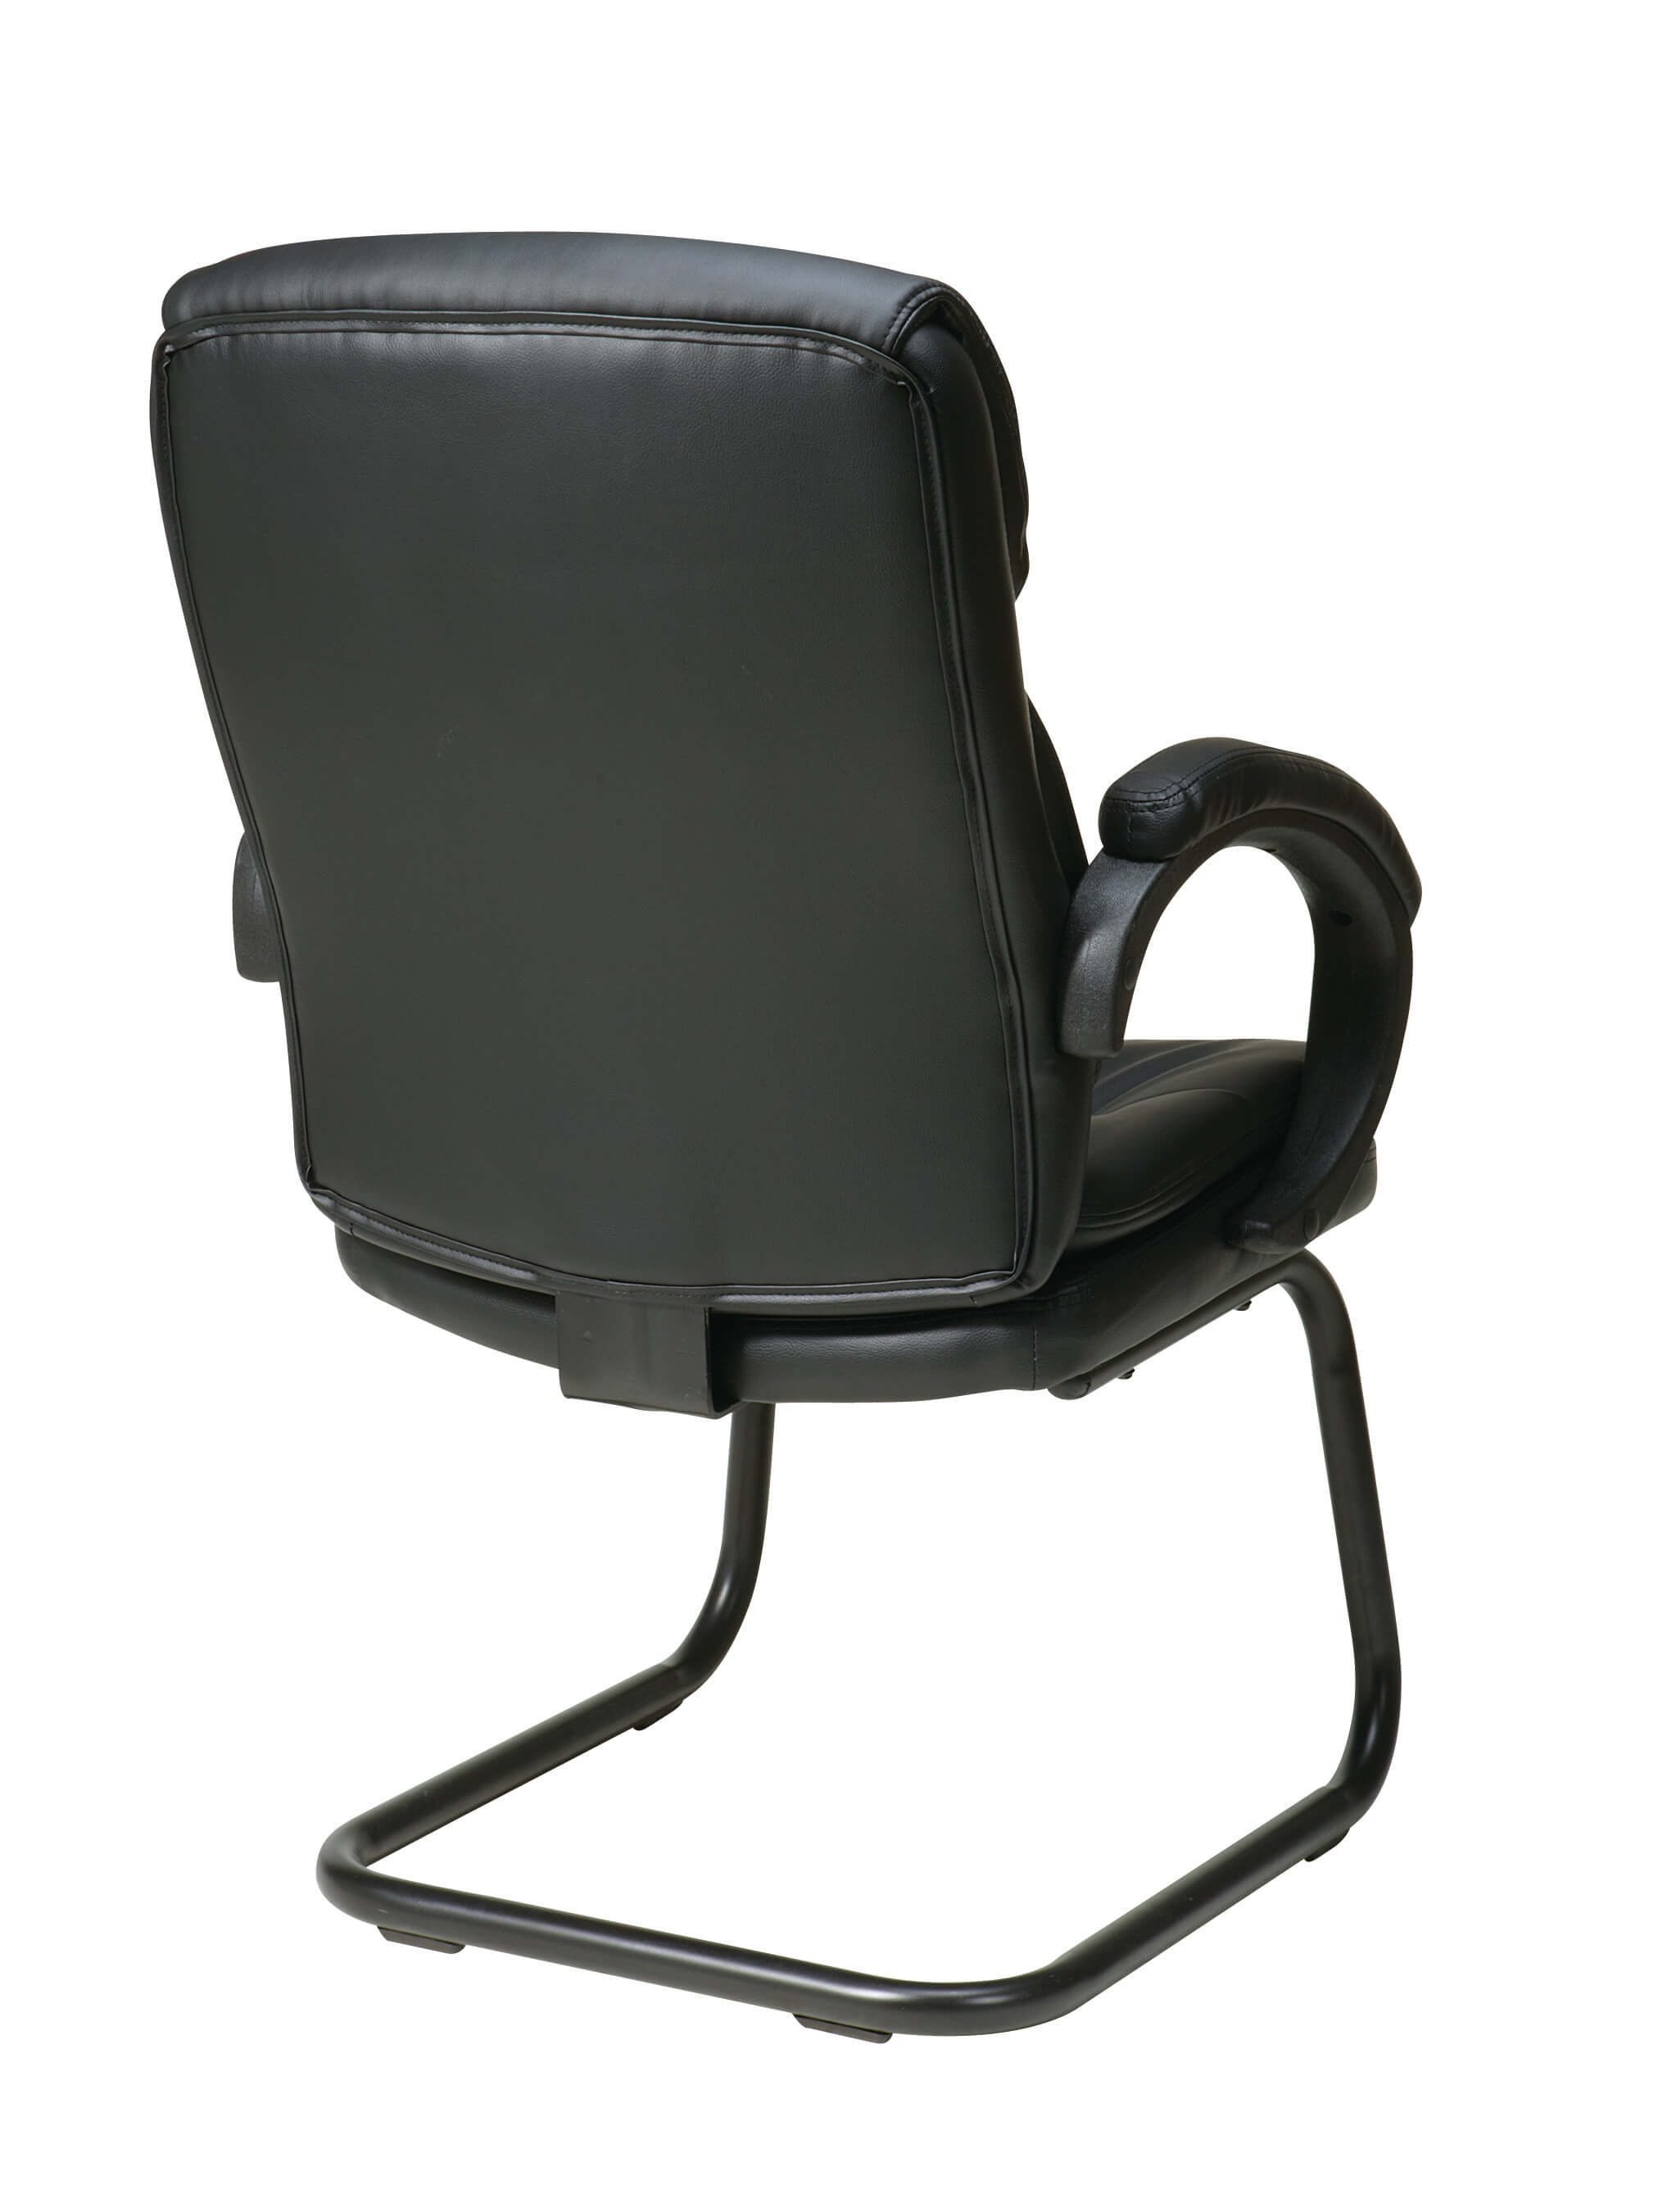 Black leather office chair back